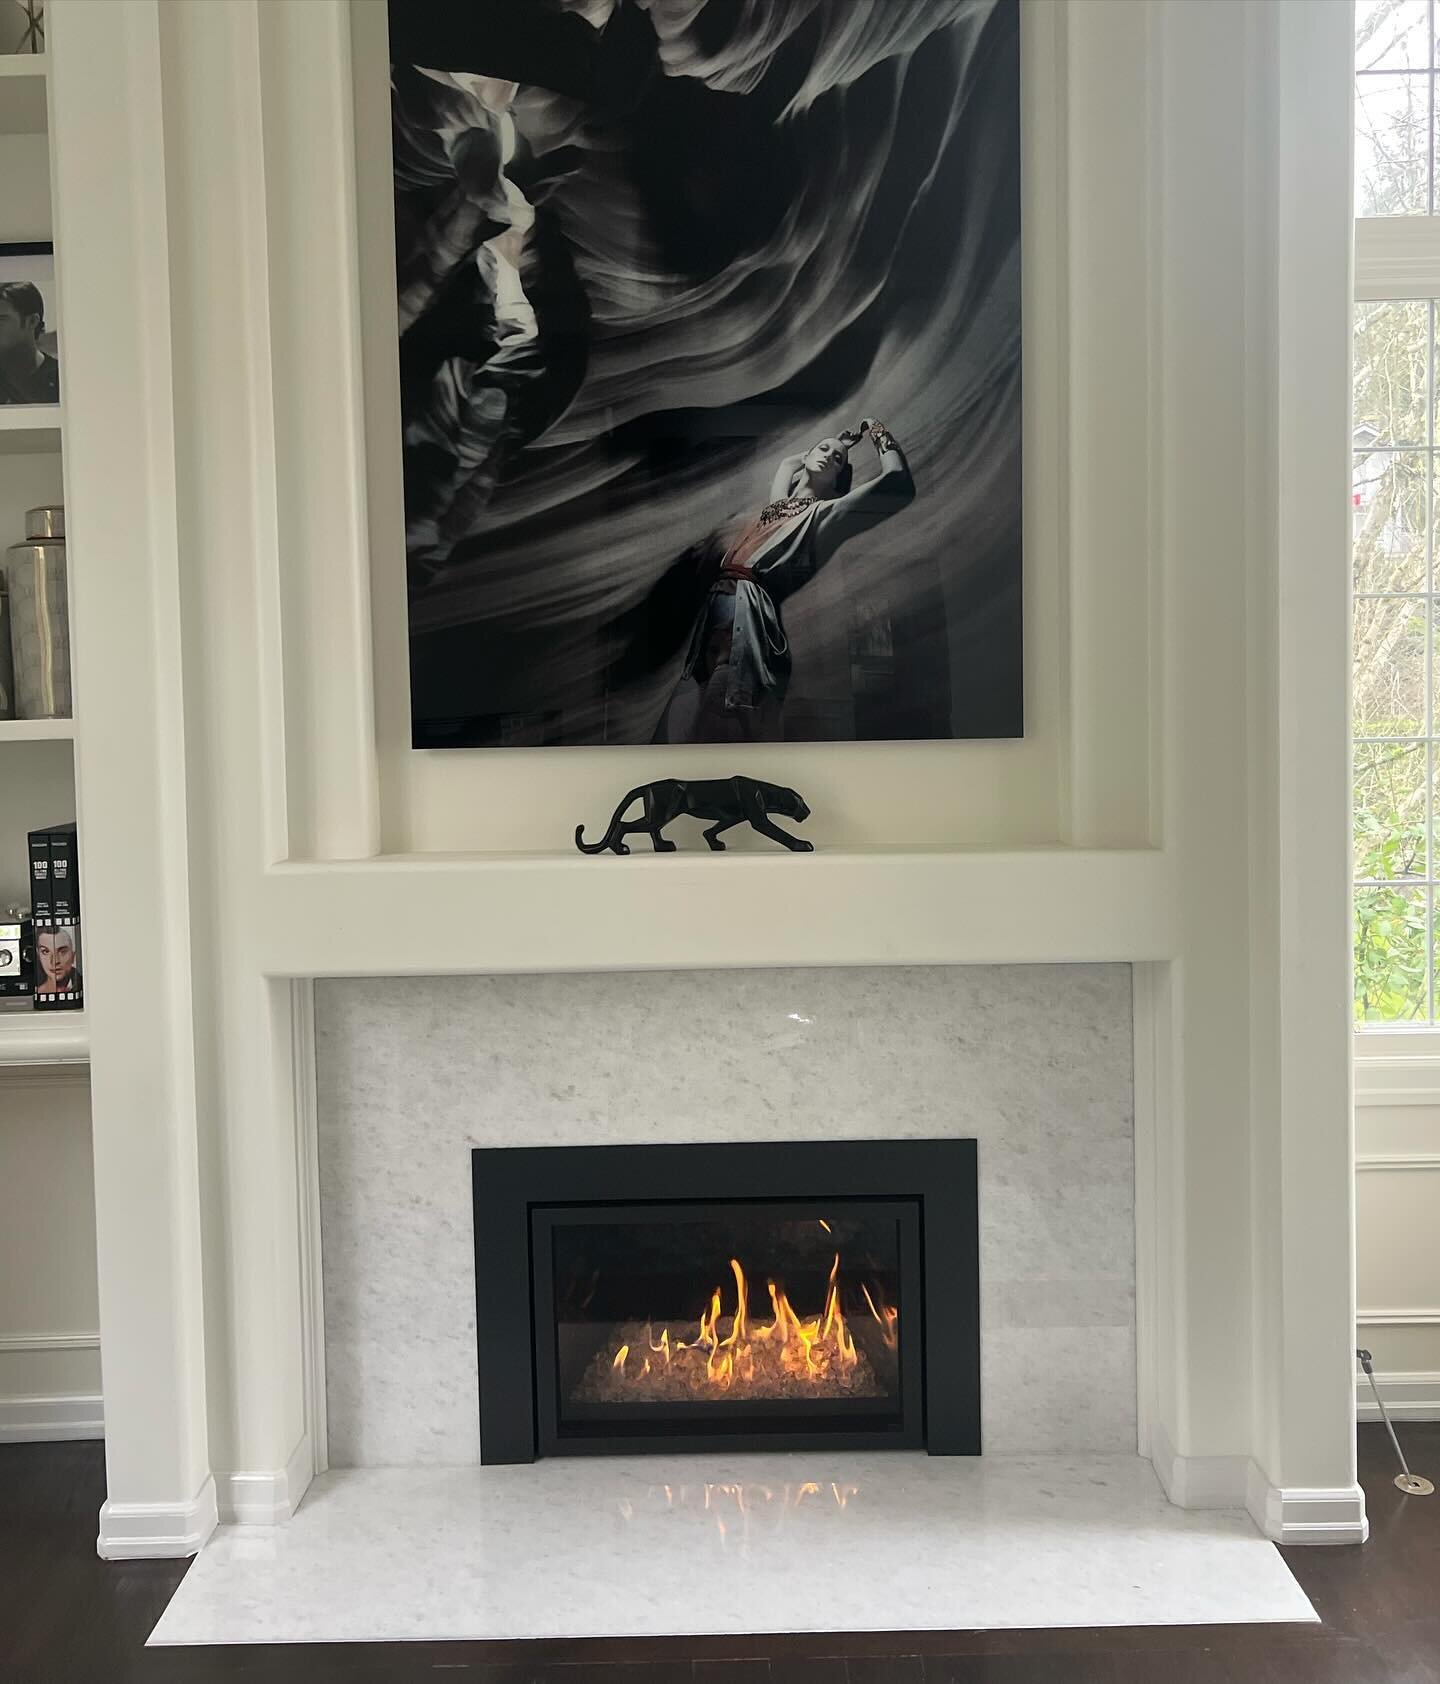 @archgardfireplaces Chantico 31 Contemporary / Clear White Glass Media / Reflective Glass Firebox Panels &amp; Custom Surround 🤩

#gasinsert #fireplace #fireplacemakeover